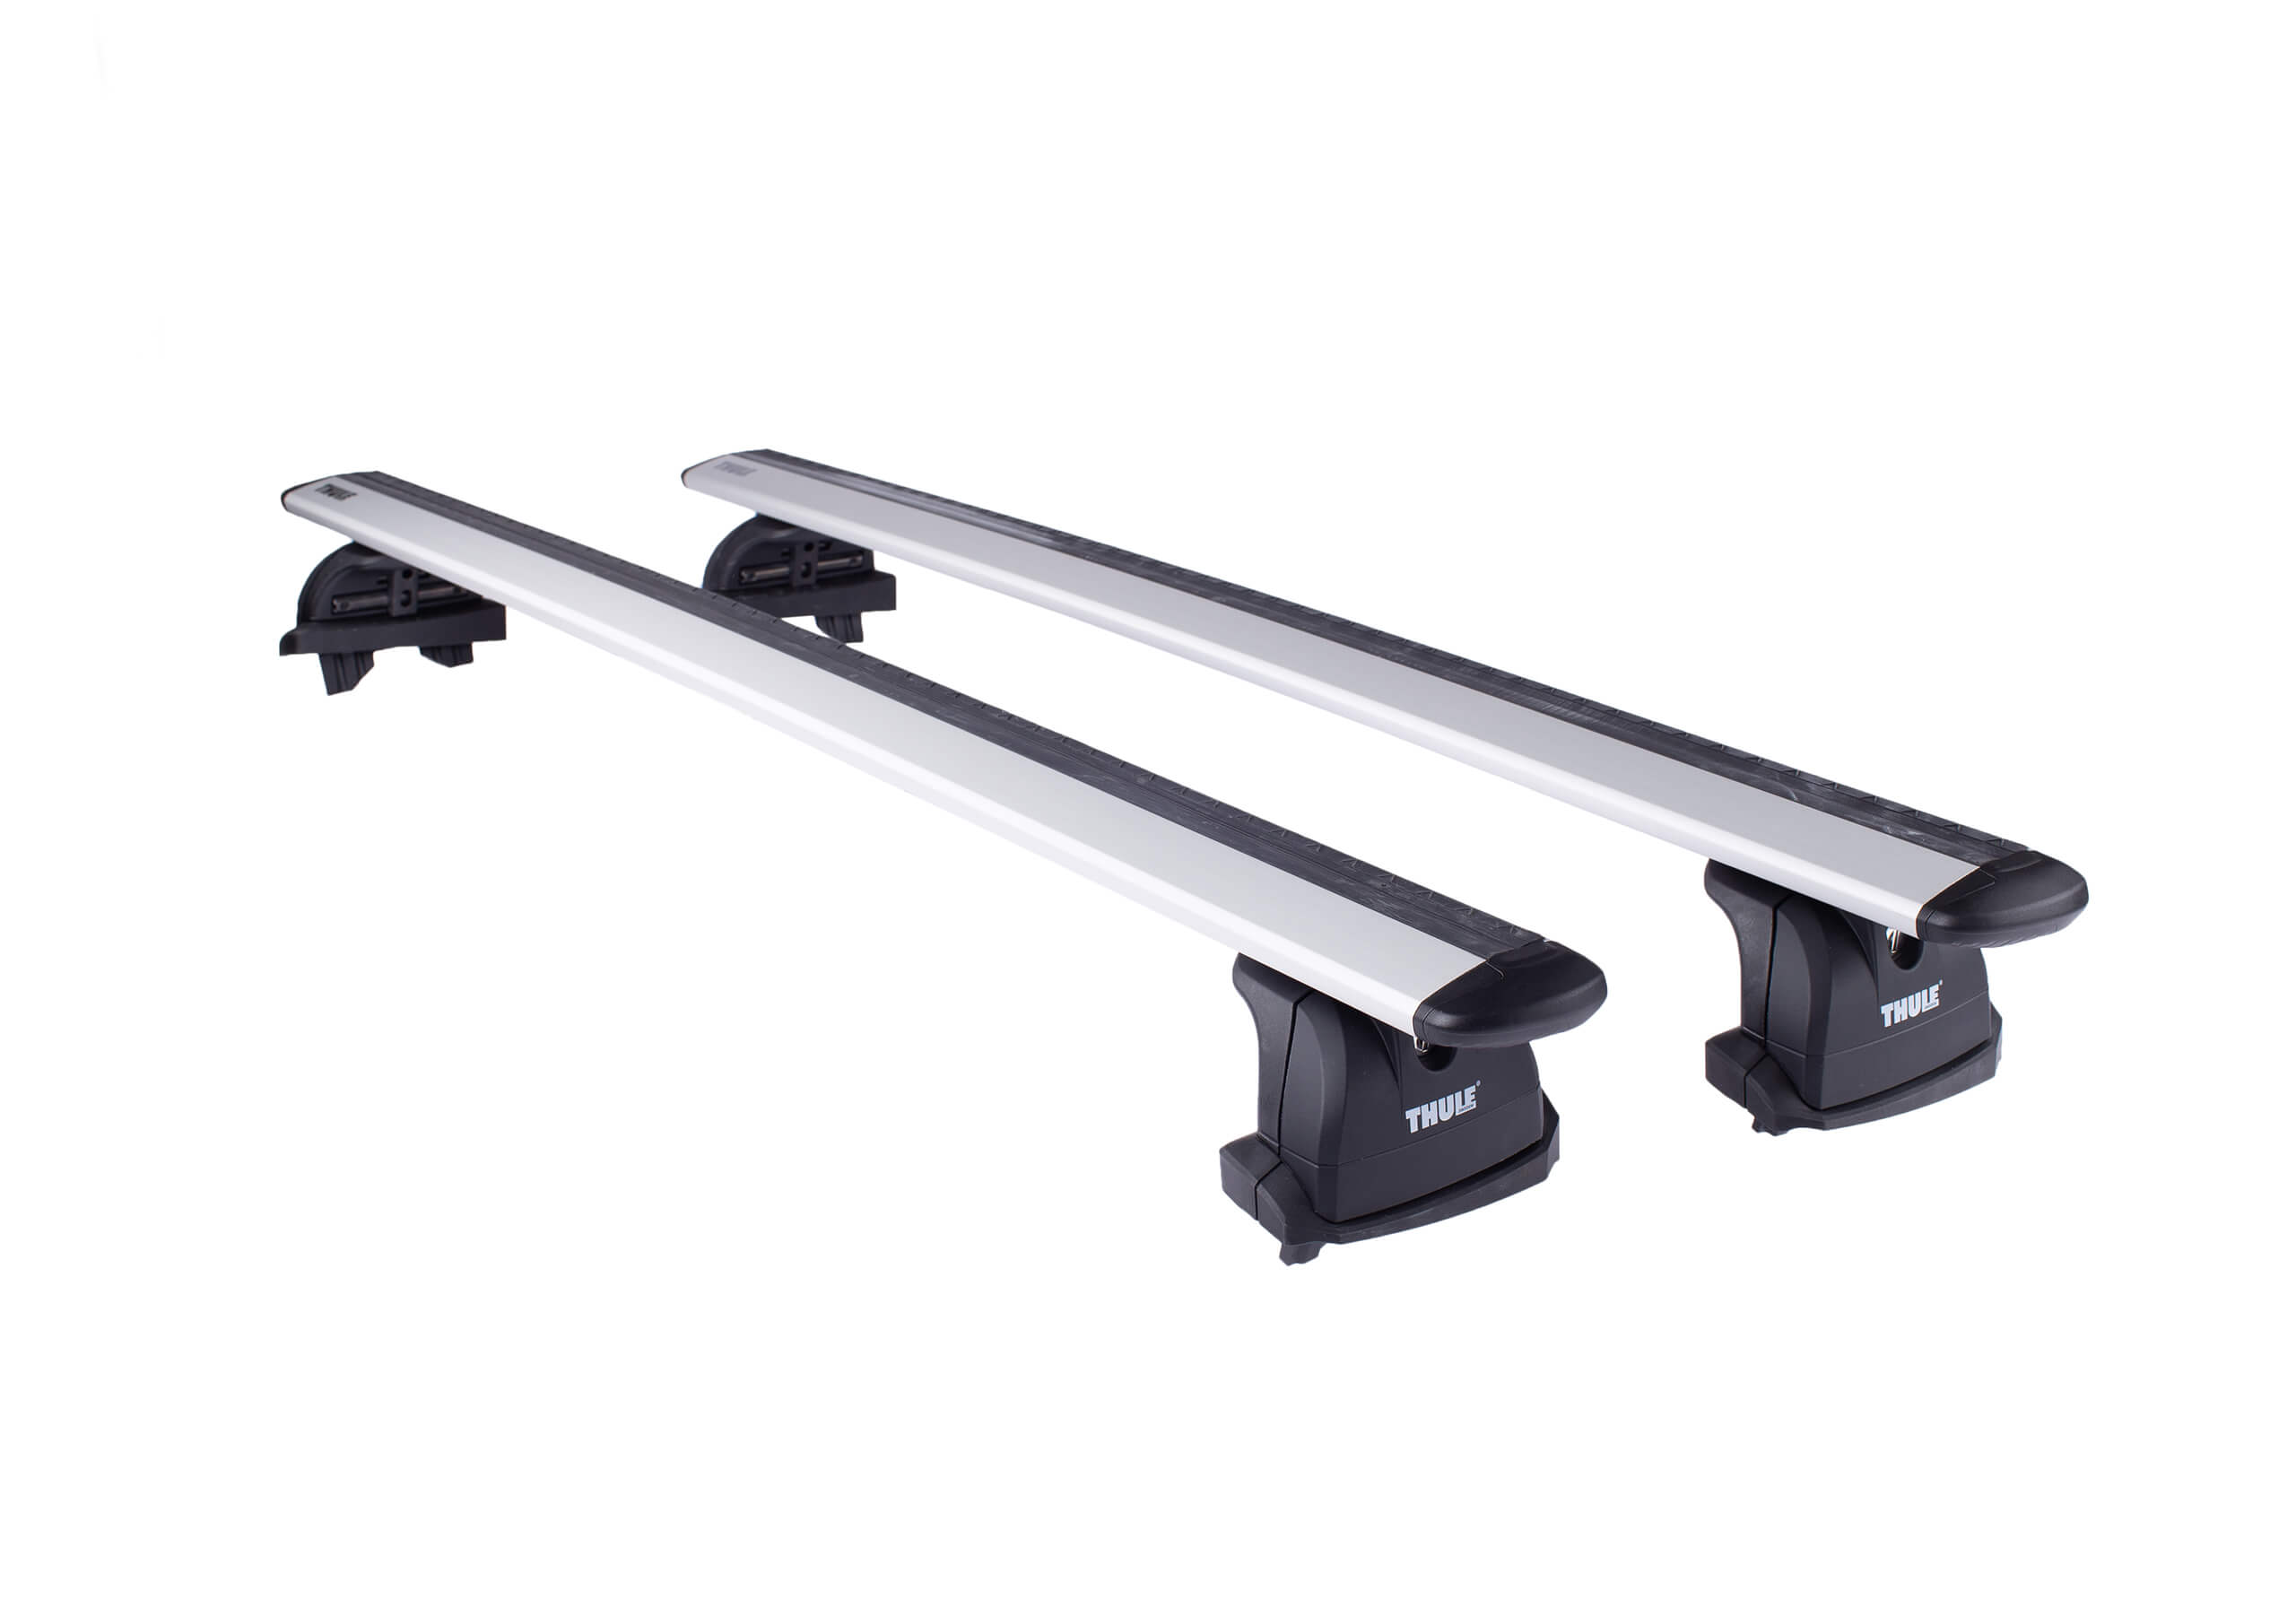 Volkswagen VW Caddy Maxi Life (2008 to 2011):Thule silver Evo WingBars package - 753, 7112, 3022